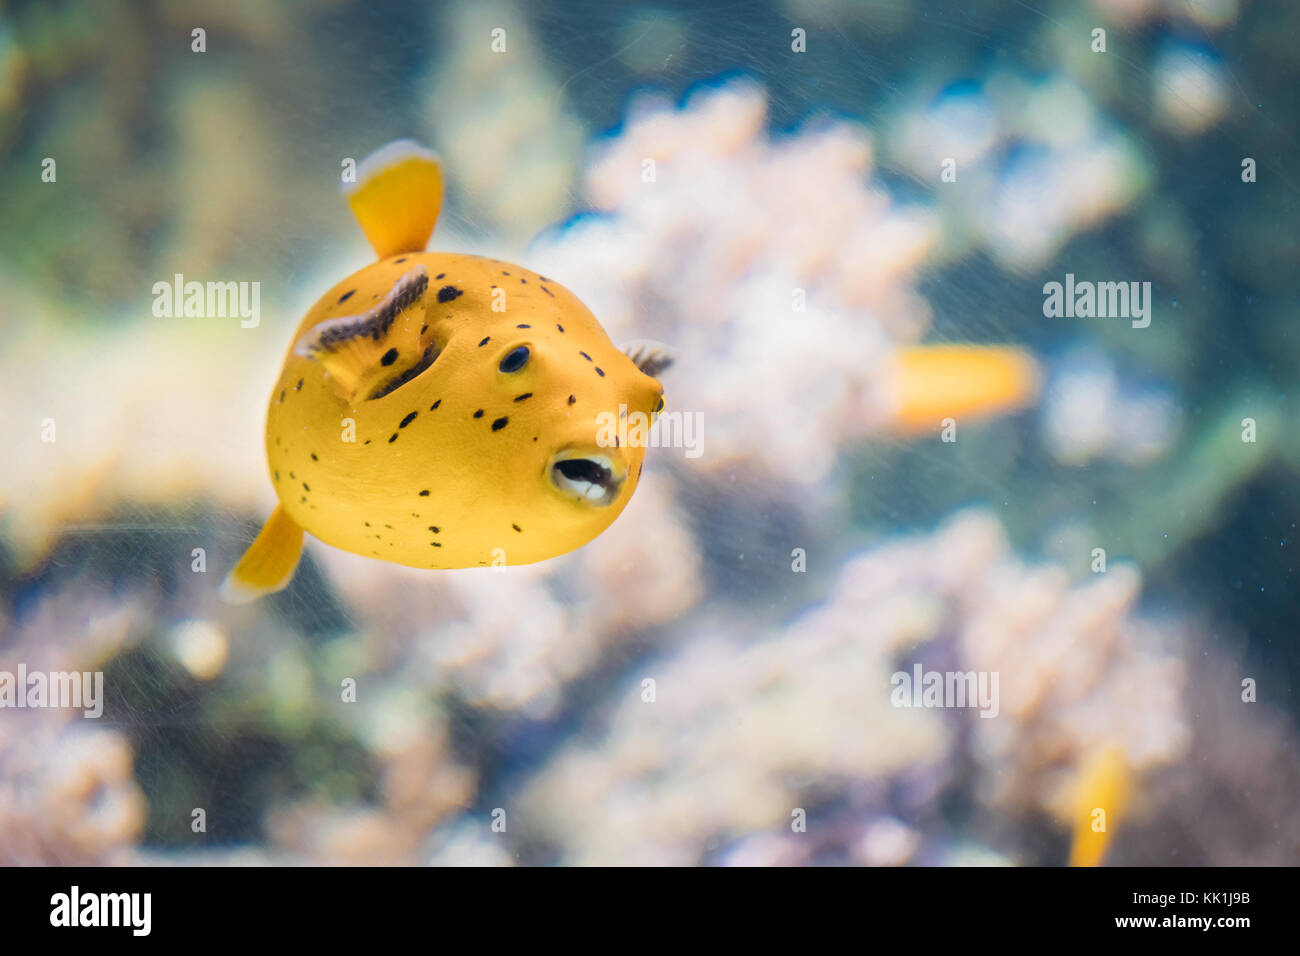 Yellow Blackspotted Puffer Or Dog-faced Puffer Fish Arothron Nigropunctatus Swimming In Water. If Not Prepared Properly, Toxin Found In Pufferfish - T Stock Photo